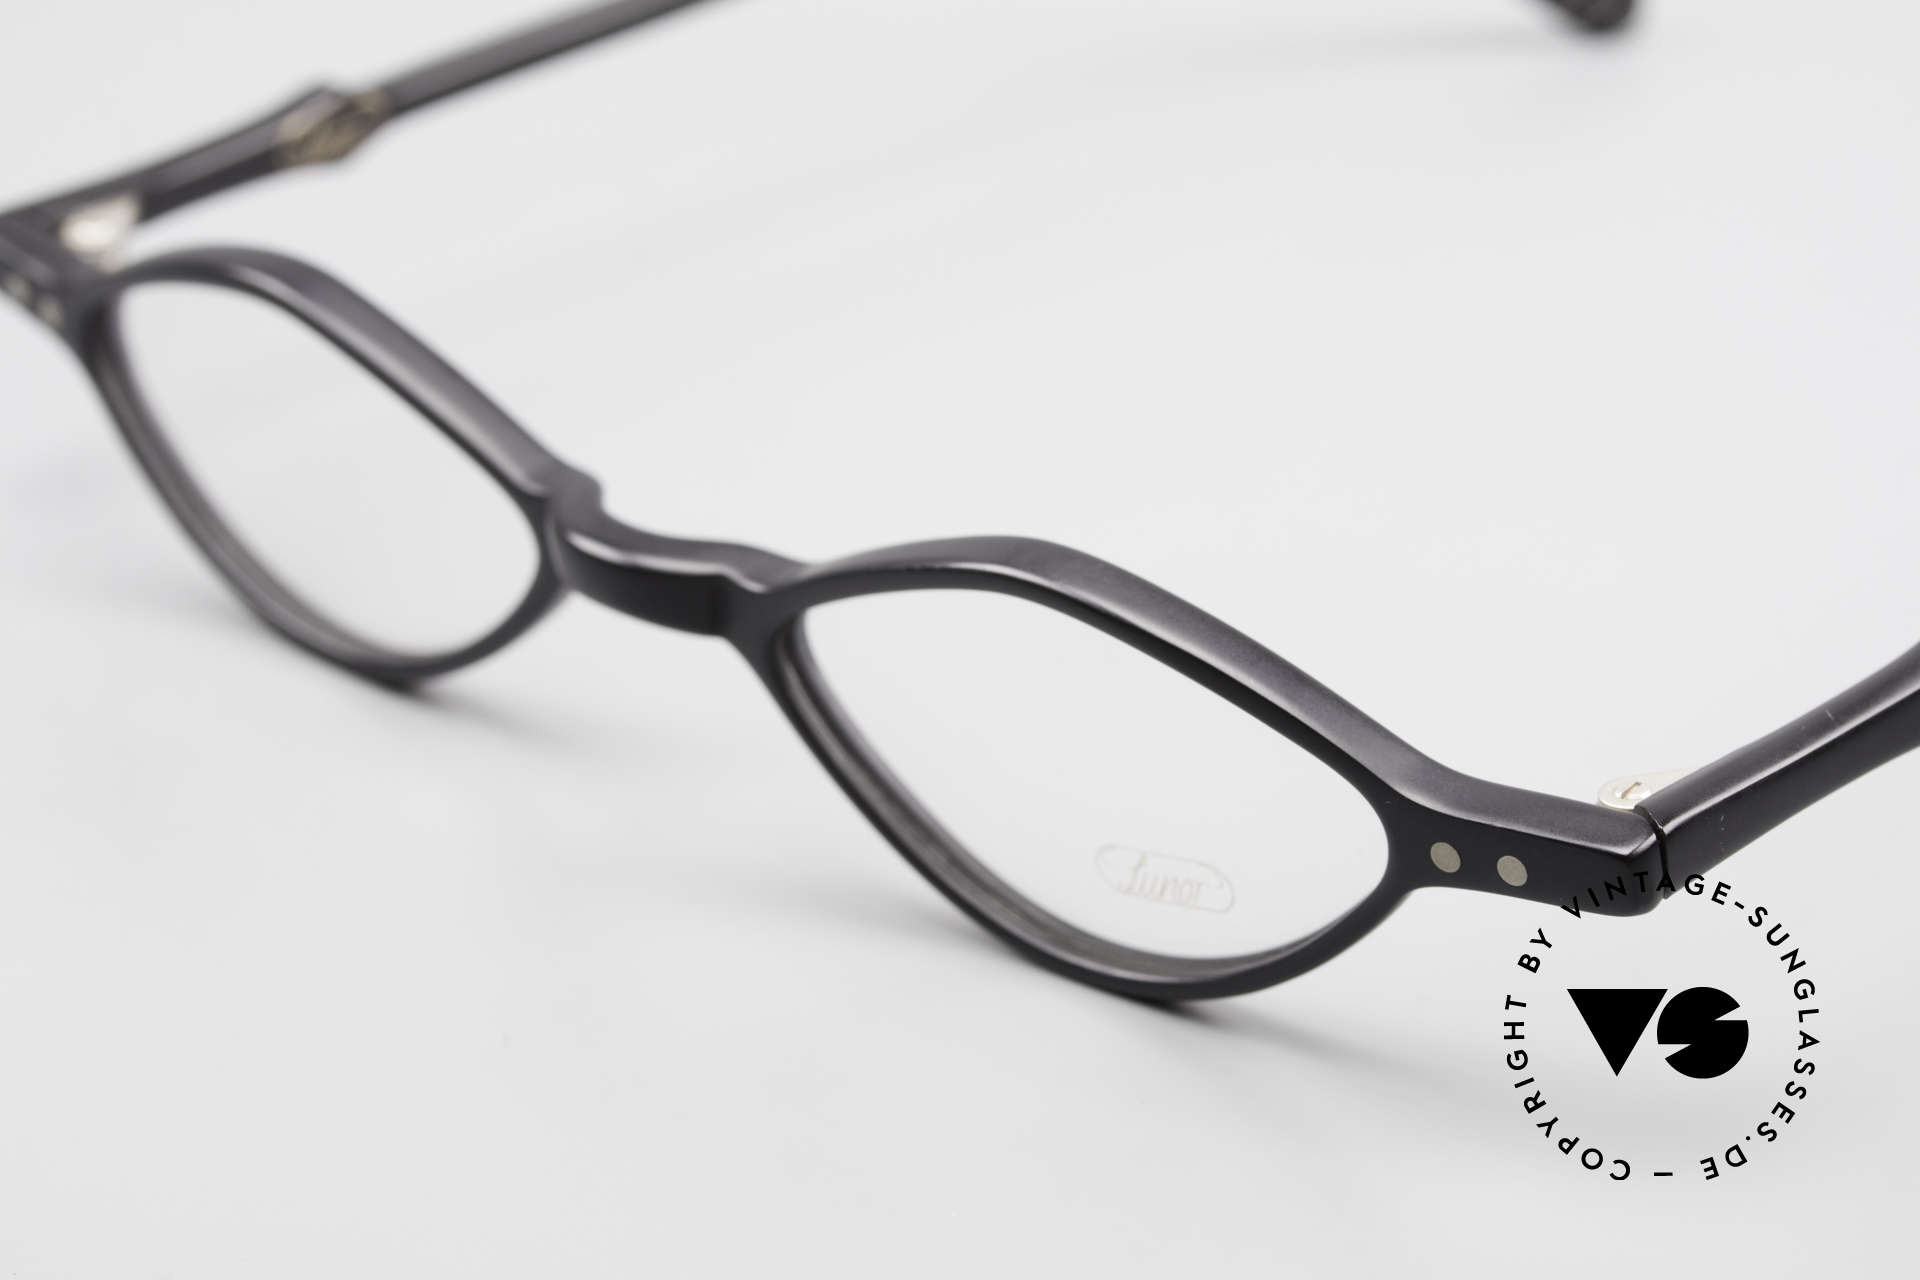 Lunor A44 Reading Glasses Acetate Frame, 100% made in Germany, hand-polished, a true CLASSIC, Made for Men and Women